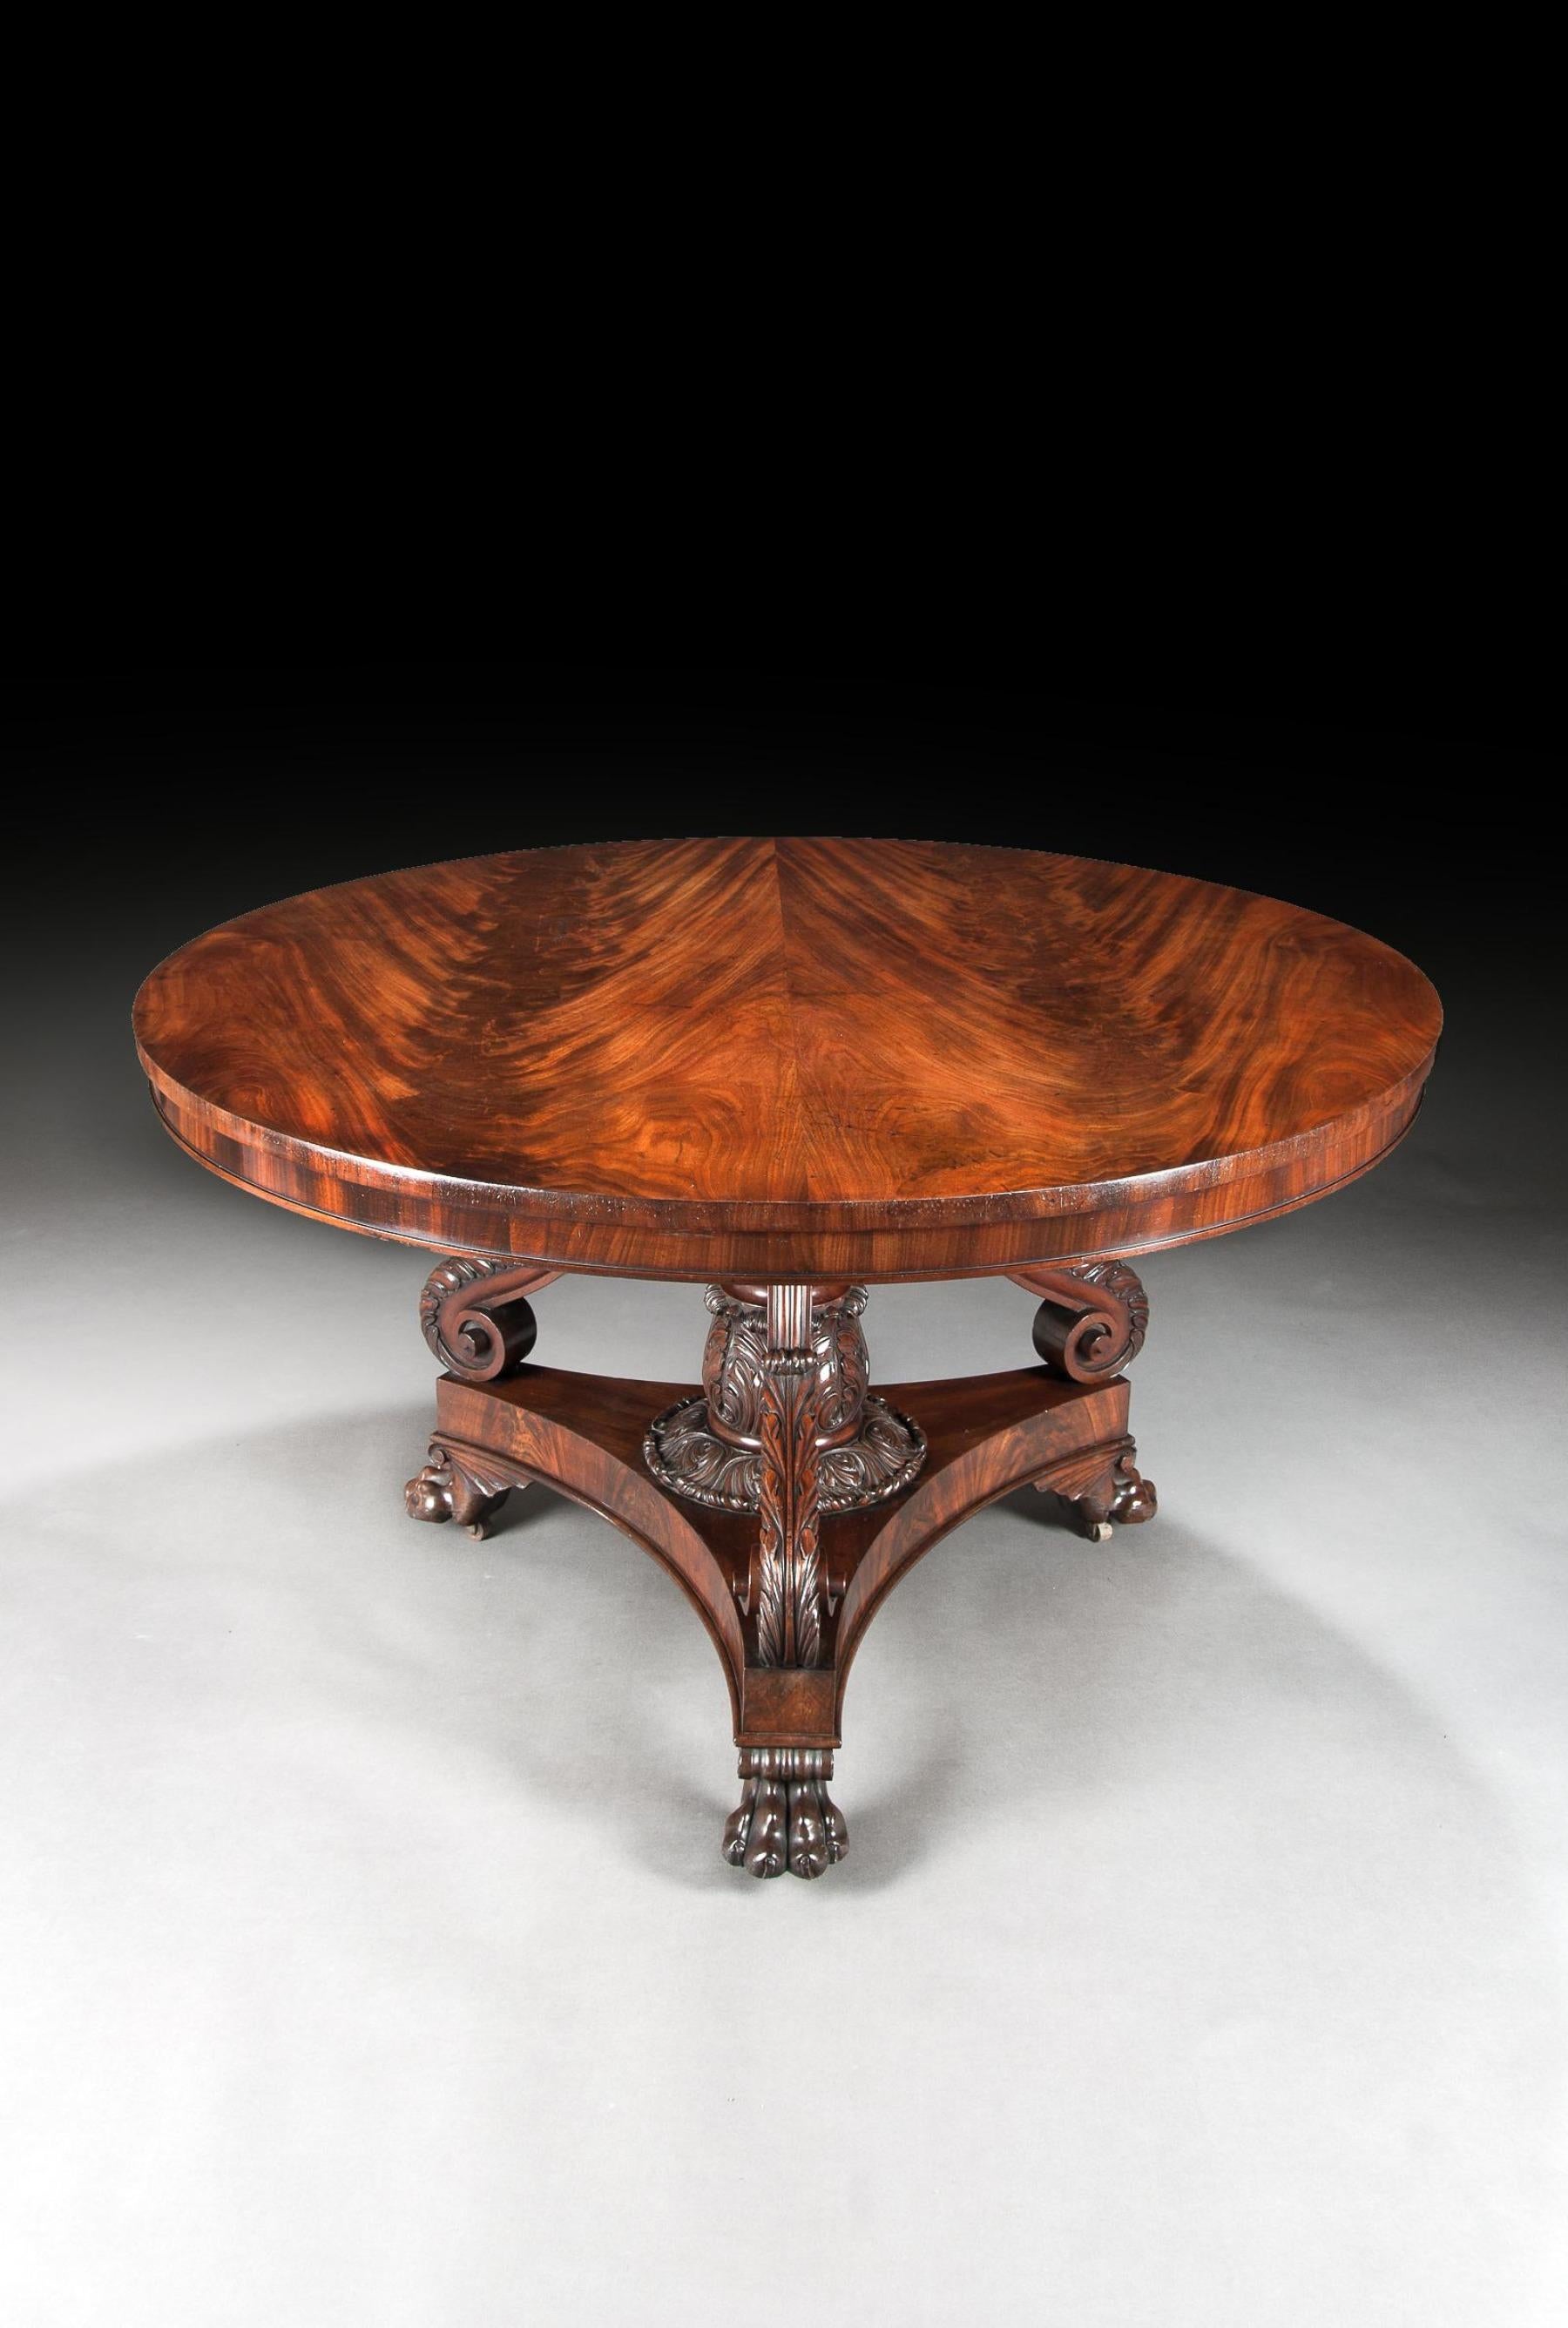 A superb 19th century Regency period mahogany centre table on a finely carved rare and unusual base.

English, circa 1825.

The circular flame mahogany book-match veneered tilt-top, raised upon a turned column with finely carved acanthus leaf